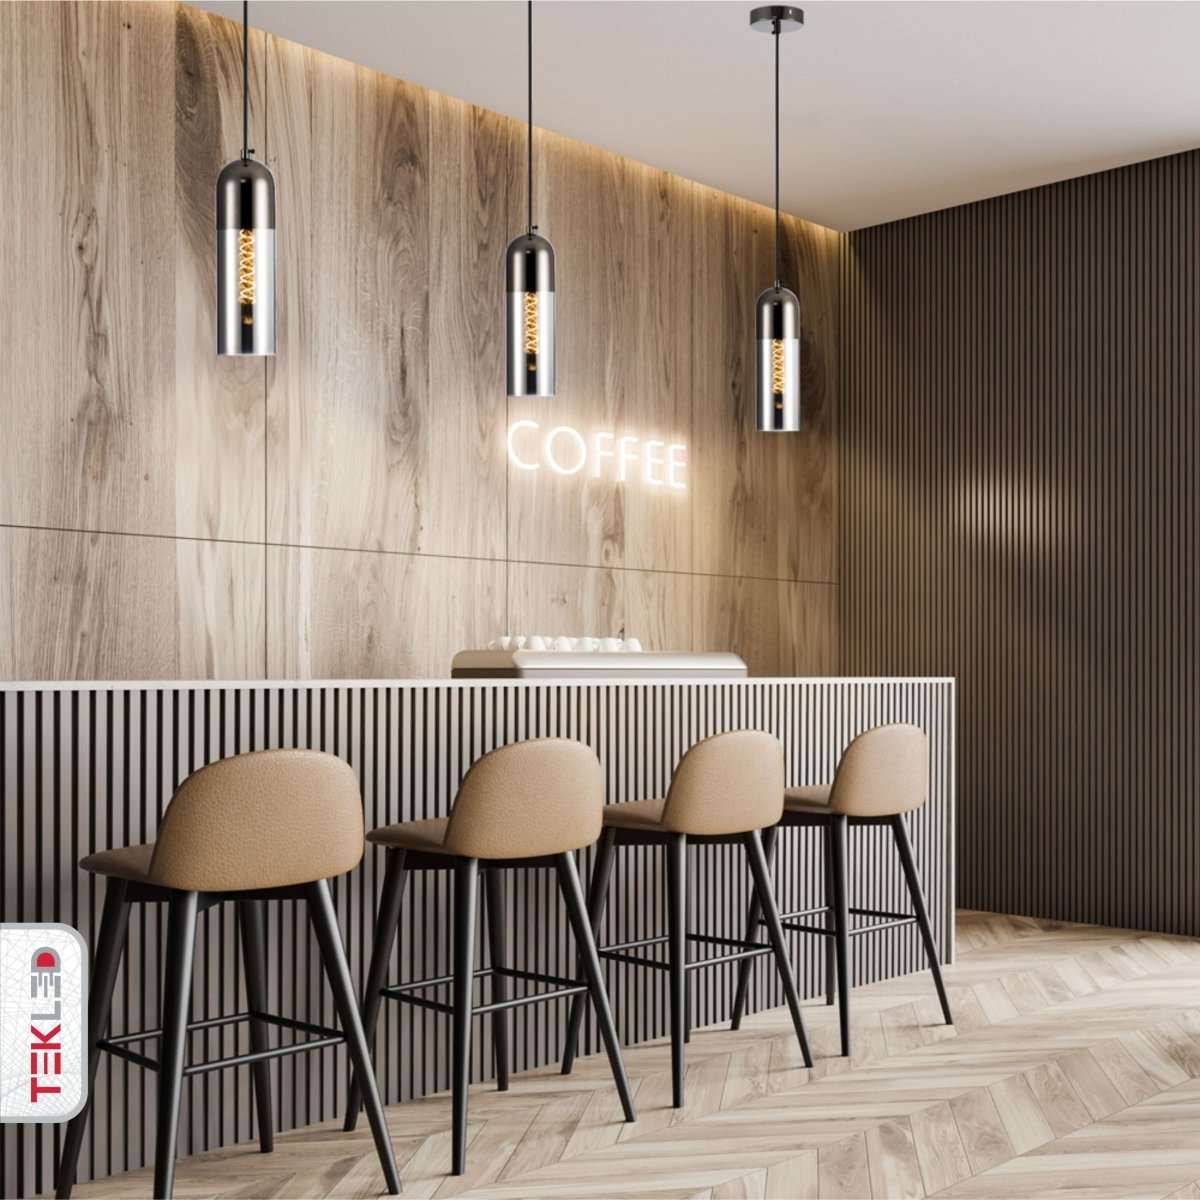 Smoky Glass Pearl Black Plated Top Cylinder Pendant Light E27 in indoor setting cafe bar top